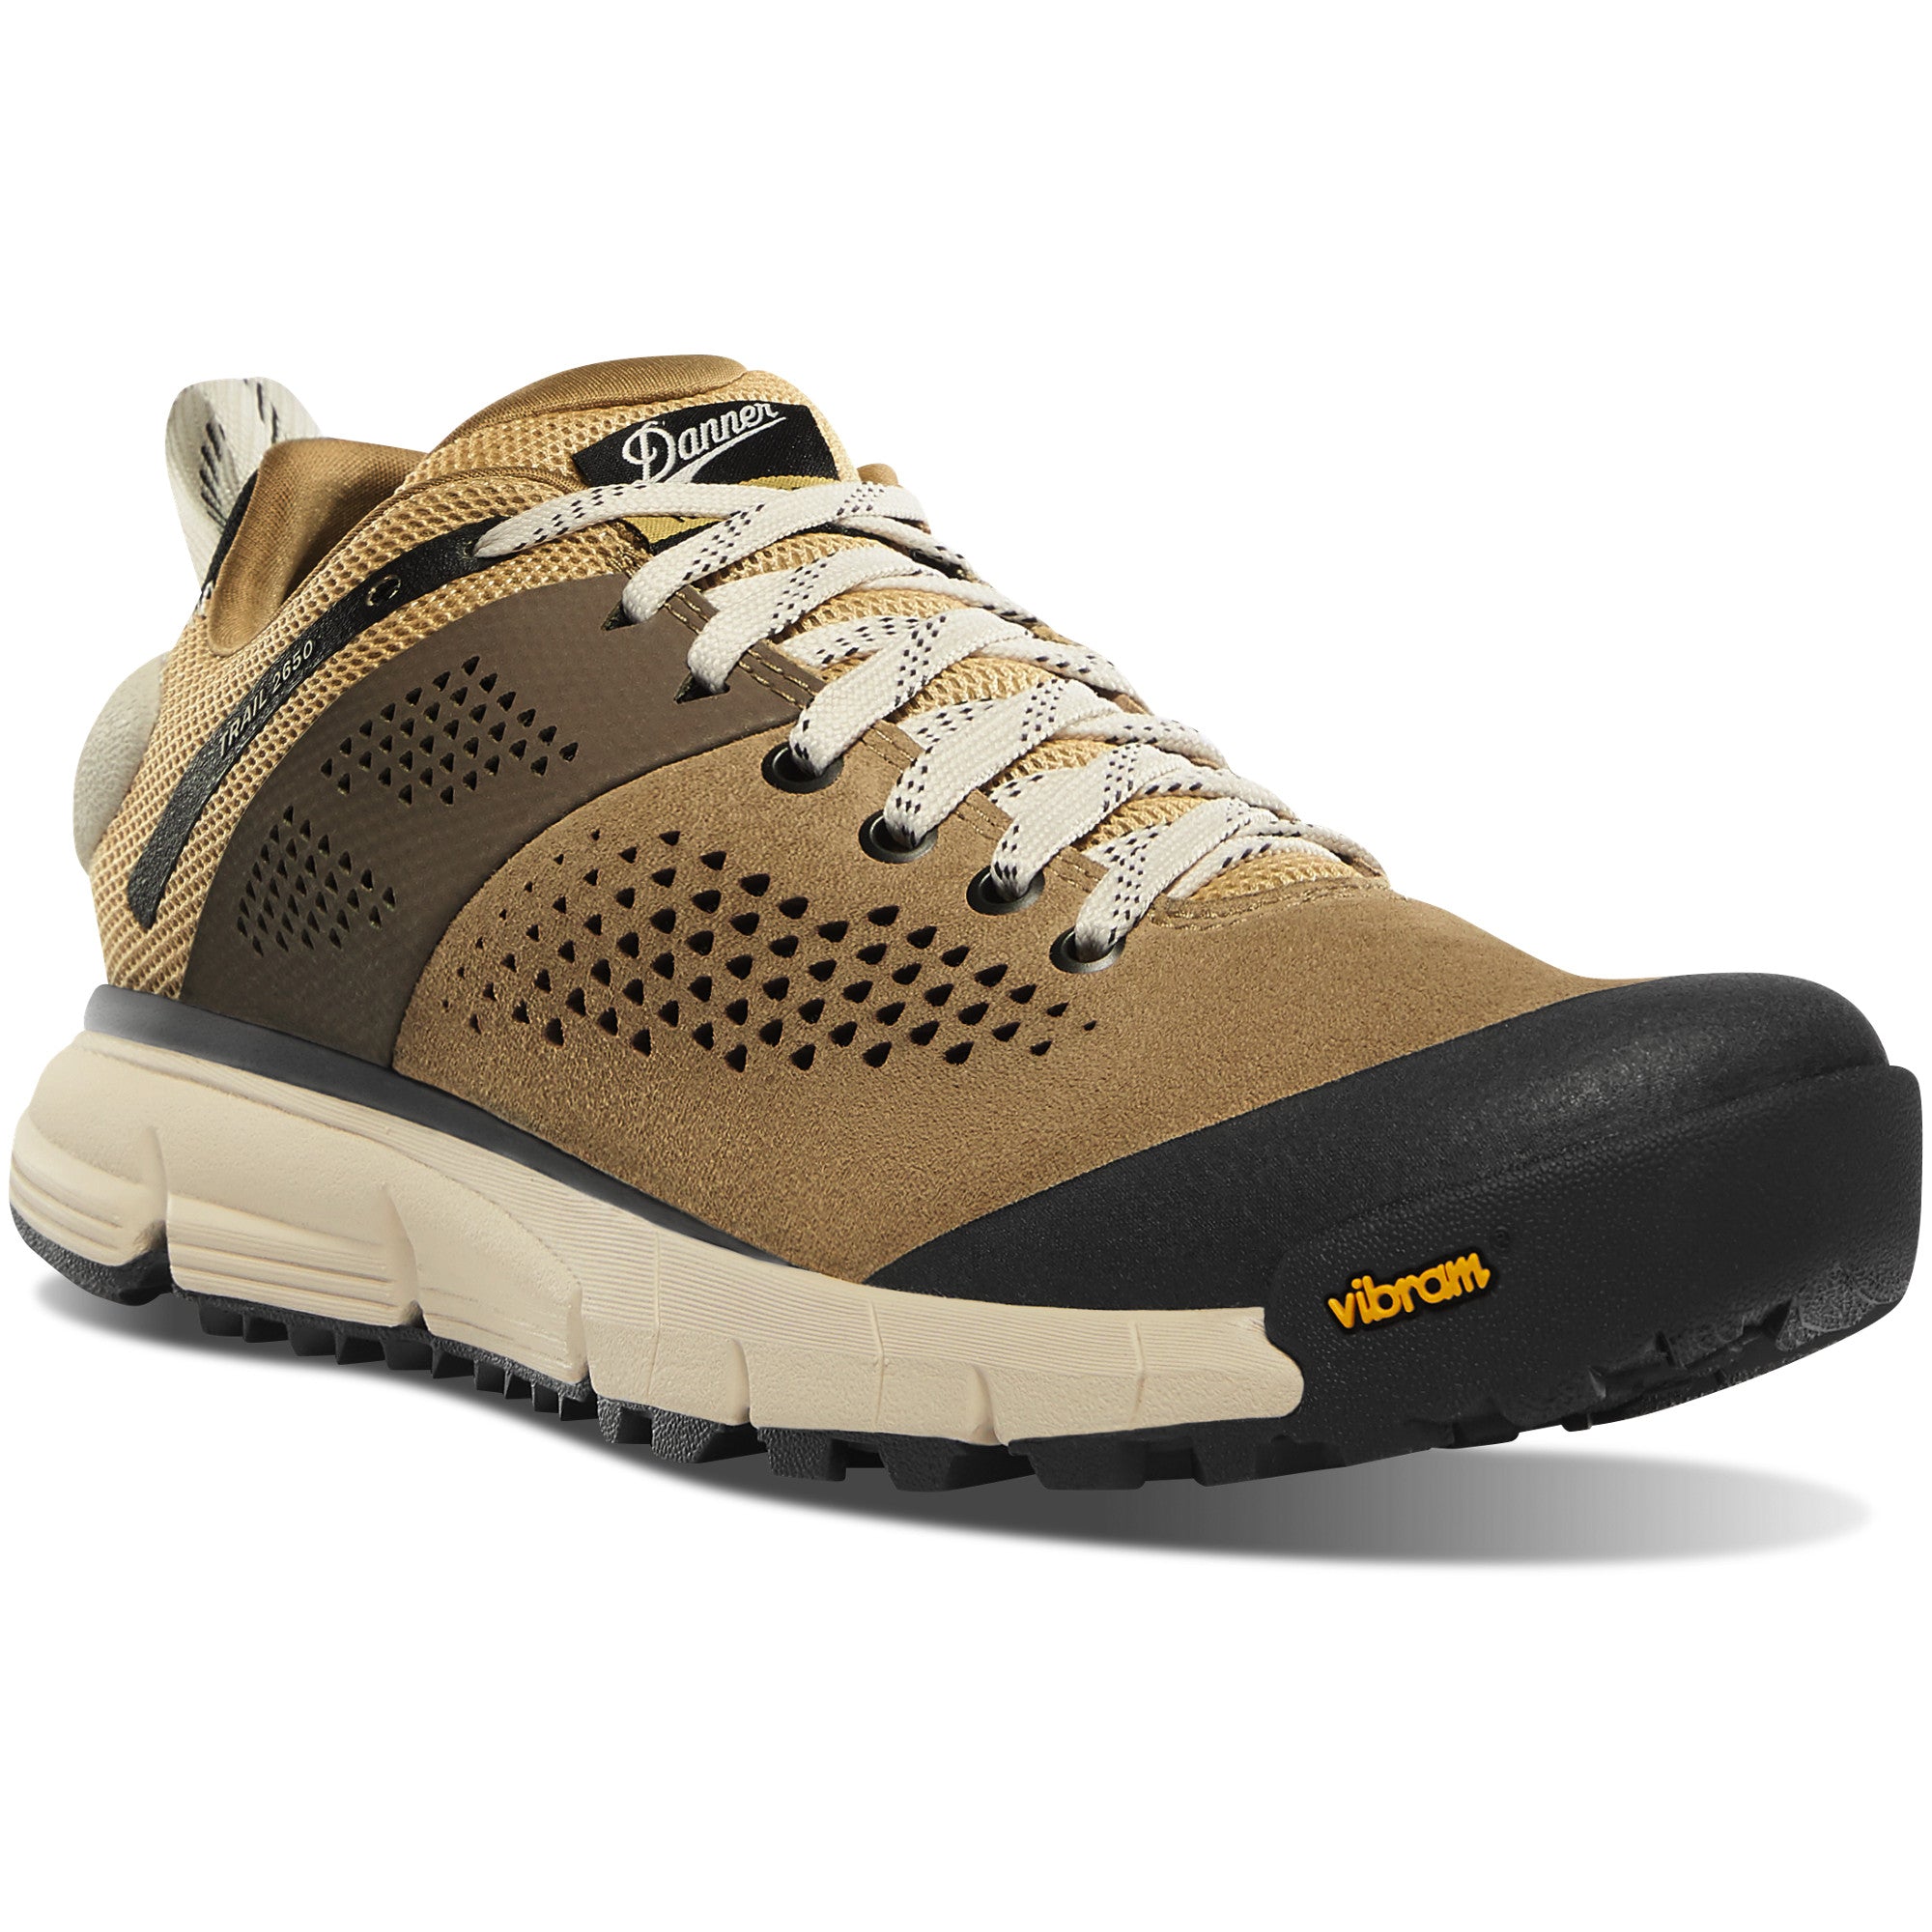 Danner Women's Trail 2650 3" Hiking Shoe in Bronze/Wheat from the side